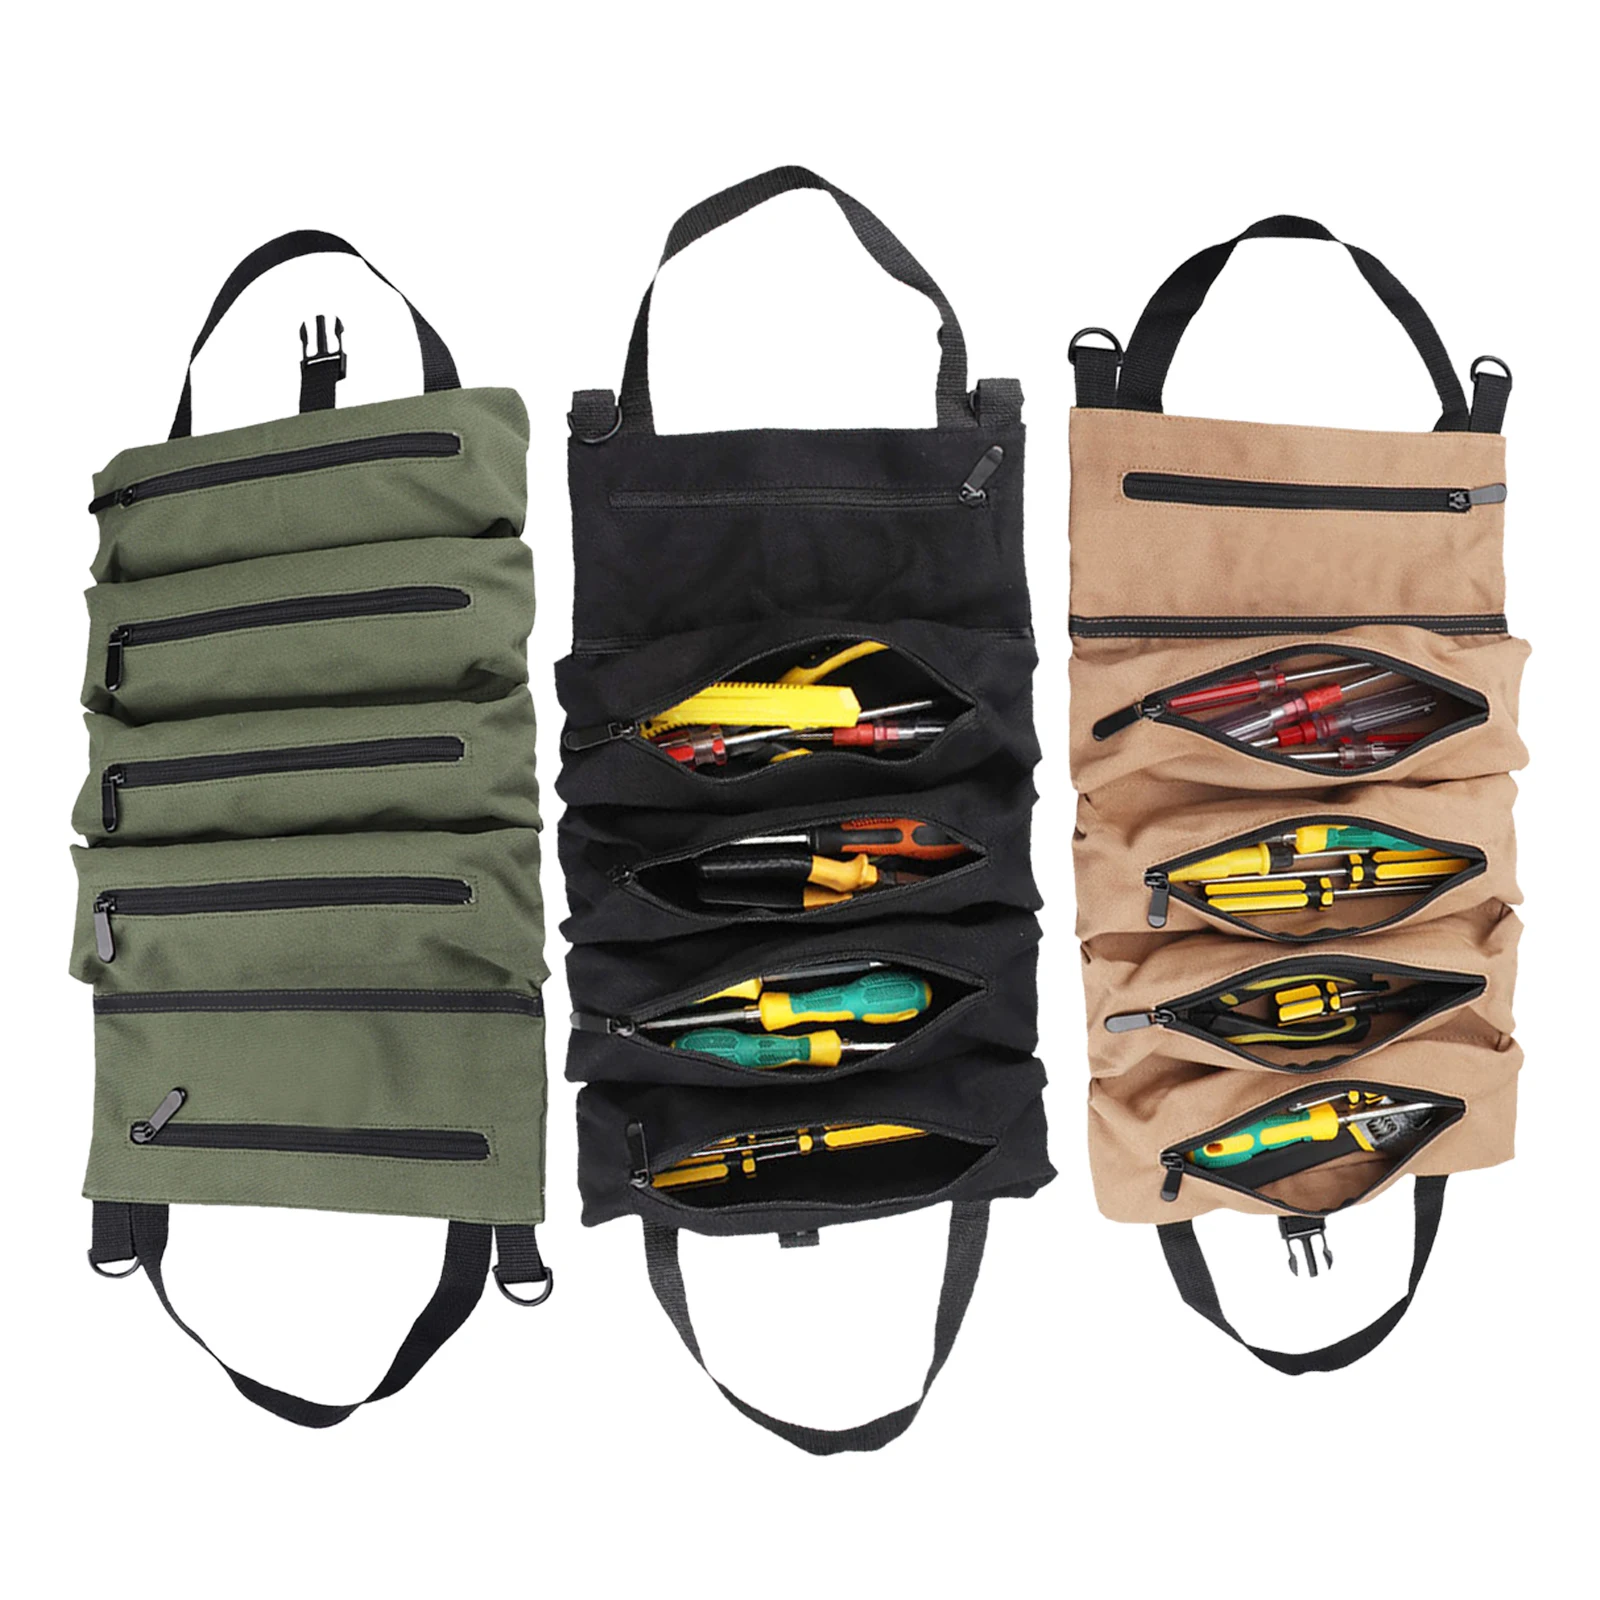 Tool Roll Organizer Large Capacity for Camping Gear Mechanical Essentials